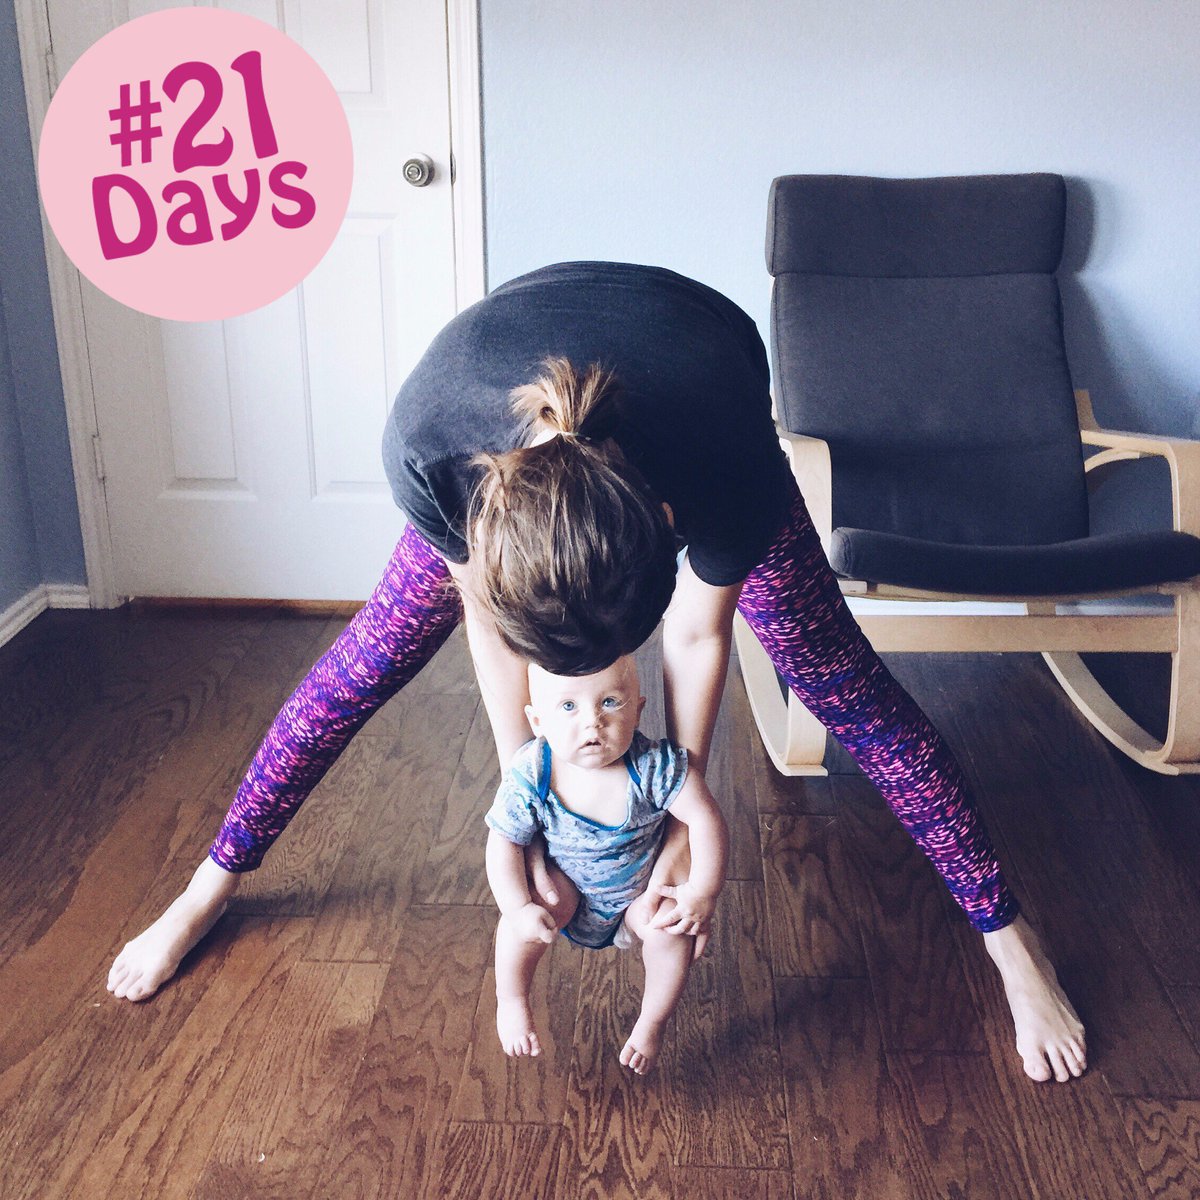 Sometimes we all need a little pick me up, right? #21Days https://t.co/KehK5nBdc4